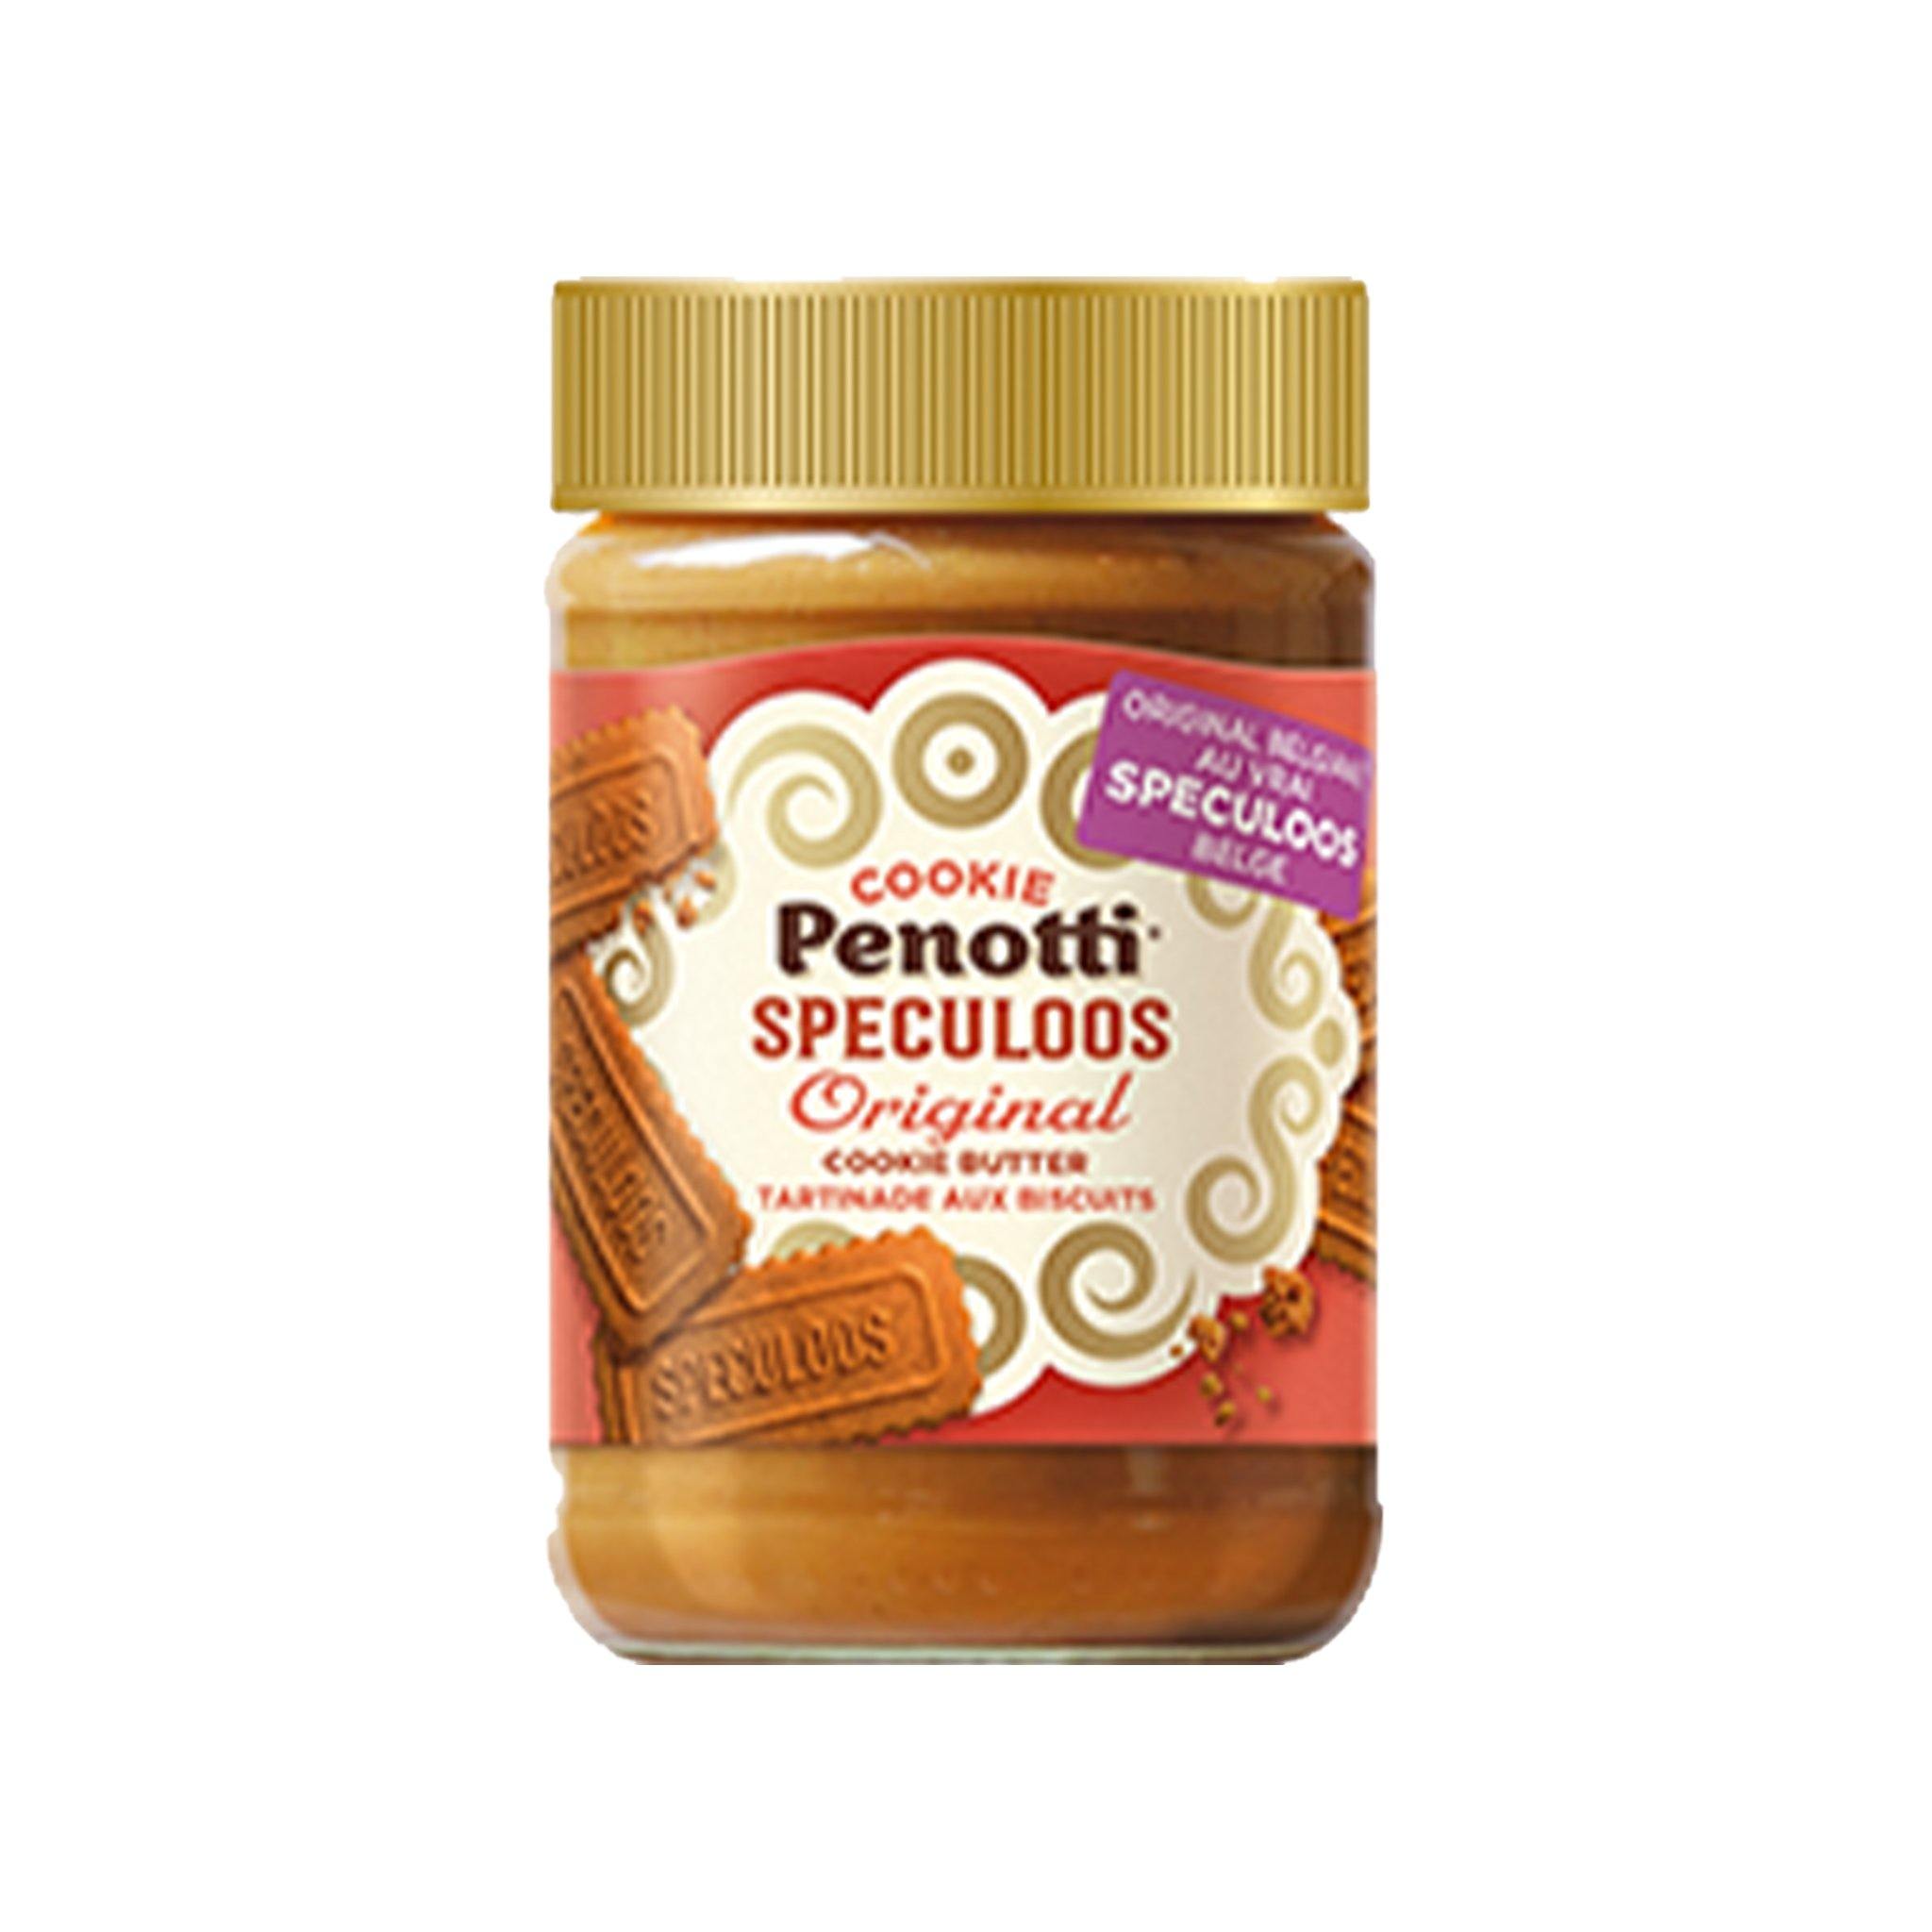 Penotti Speculoos Cookie Butter - Sweet Exotics